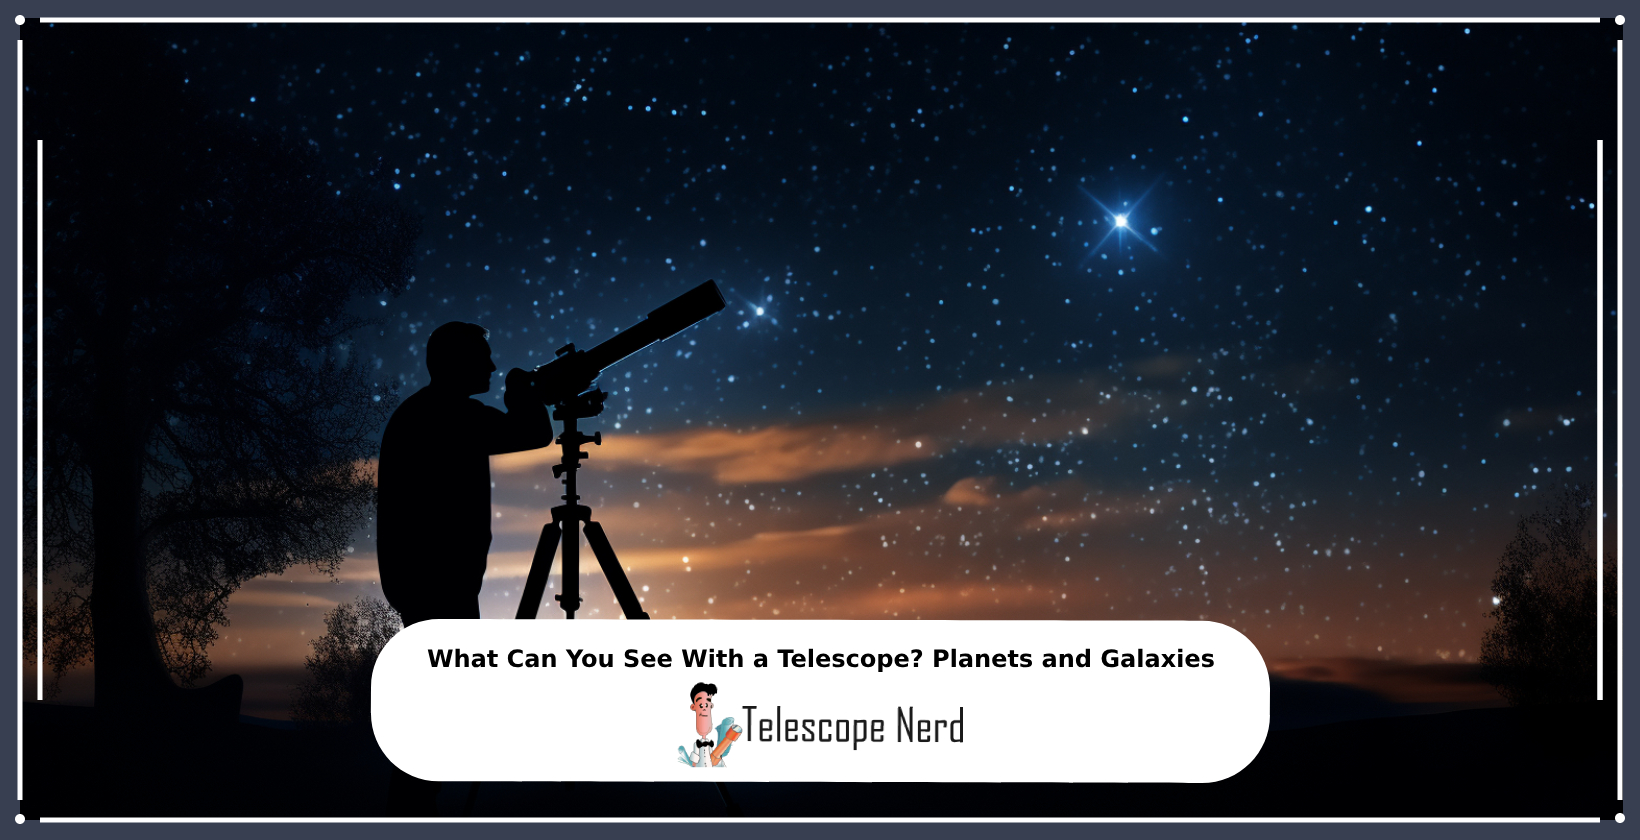 celestial objects that you can see with a telescope